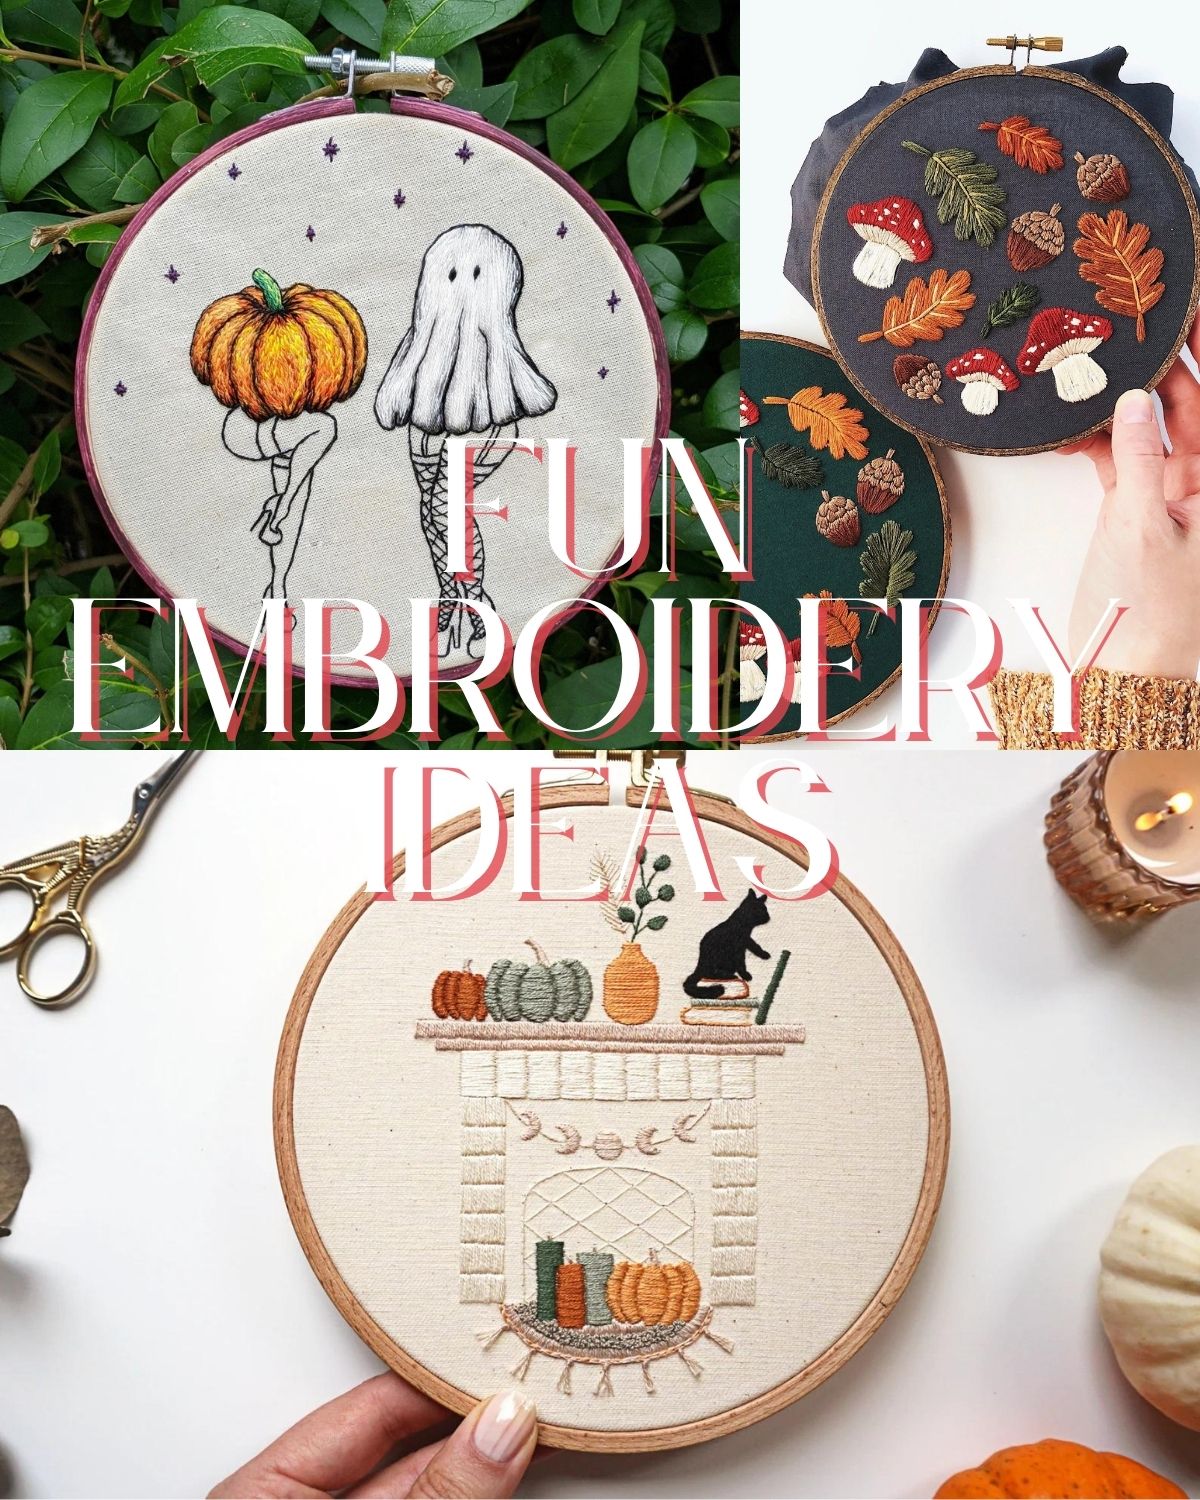 Three fun and funky embroidery pieces